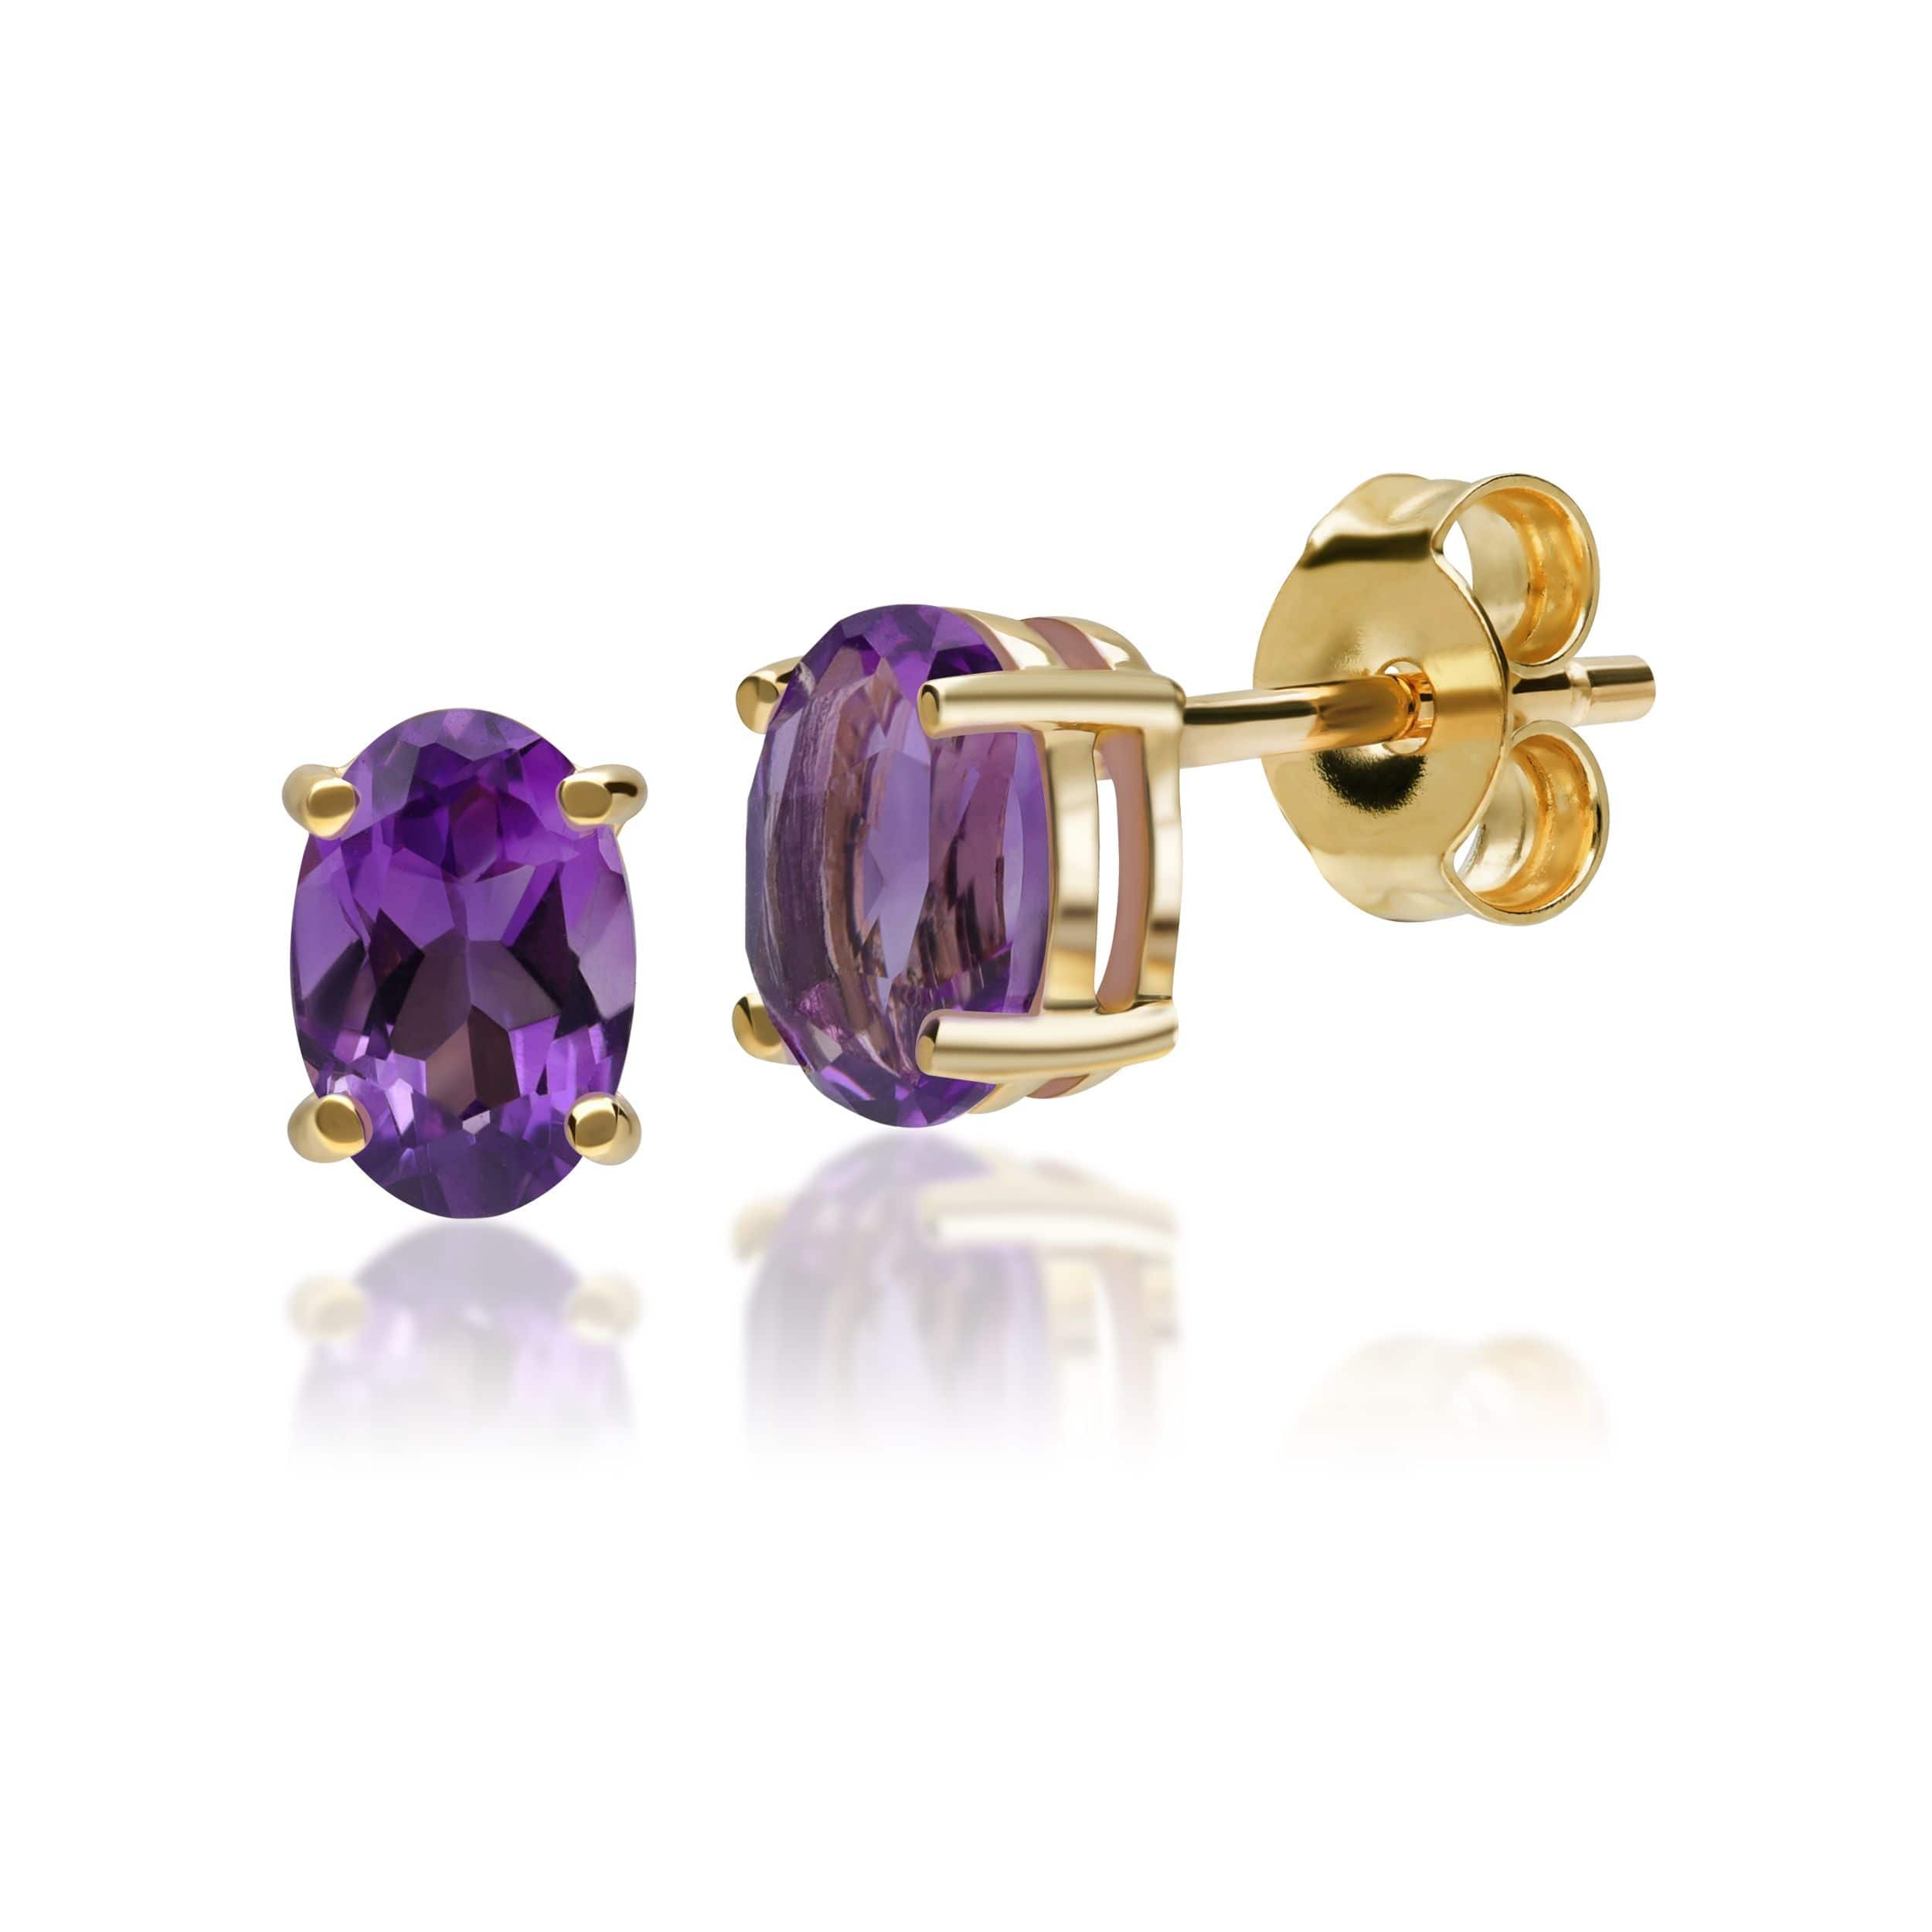 22475 Classic Oval Amethyst Stud Earrings in 9ct Yellow Gold 6x4mm 1